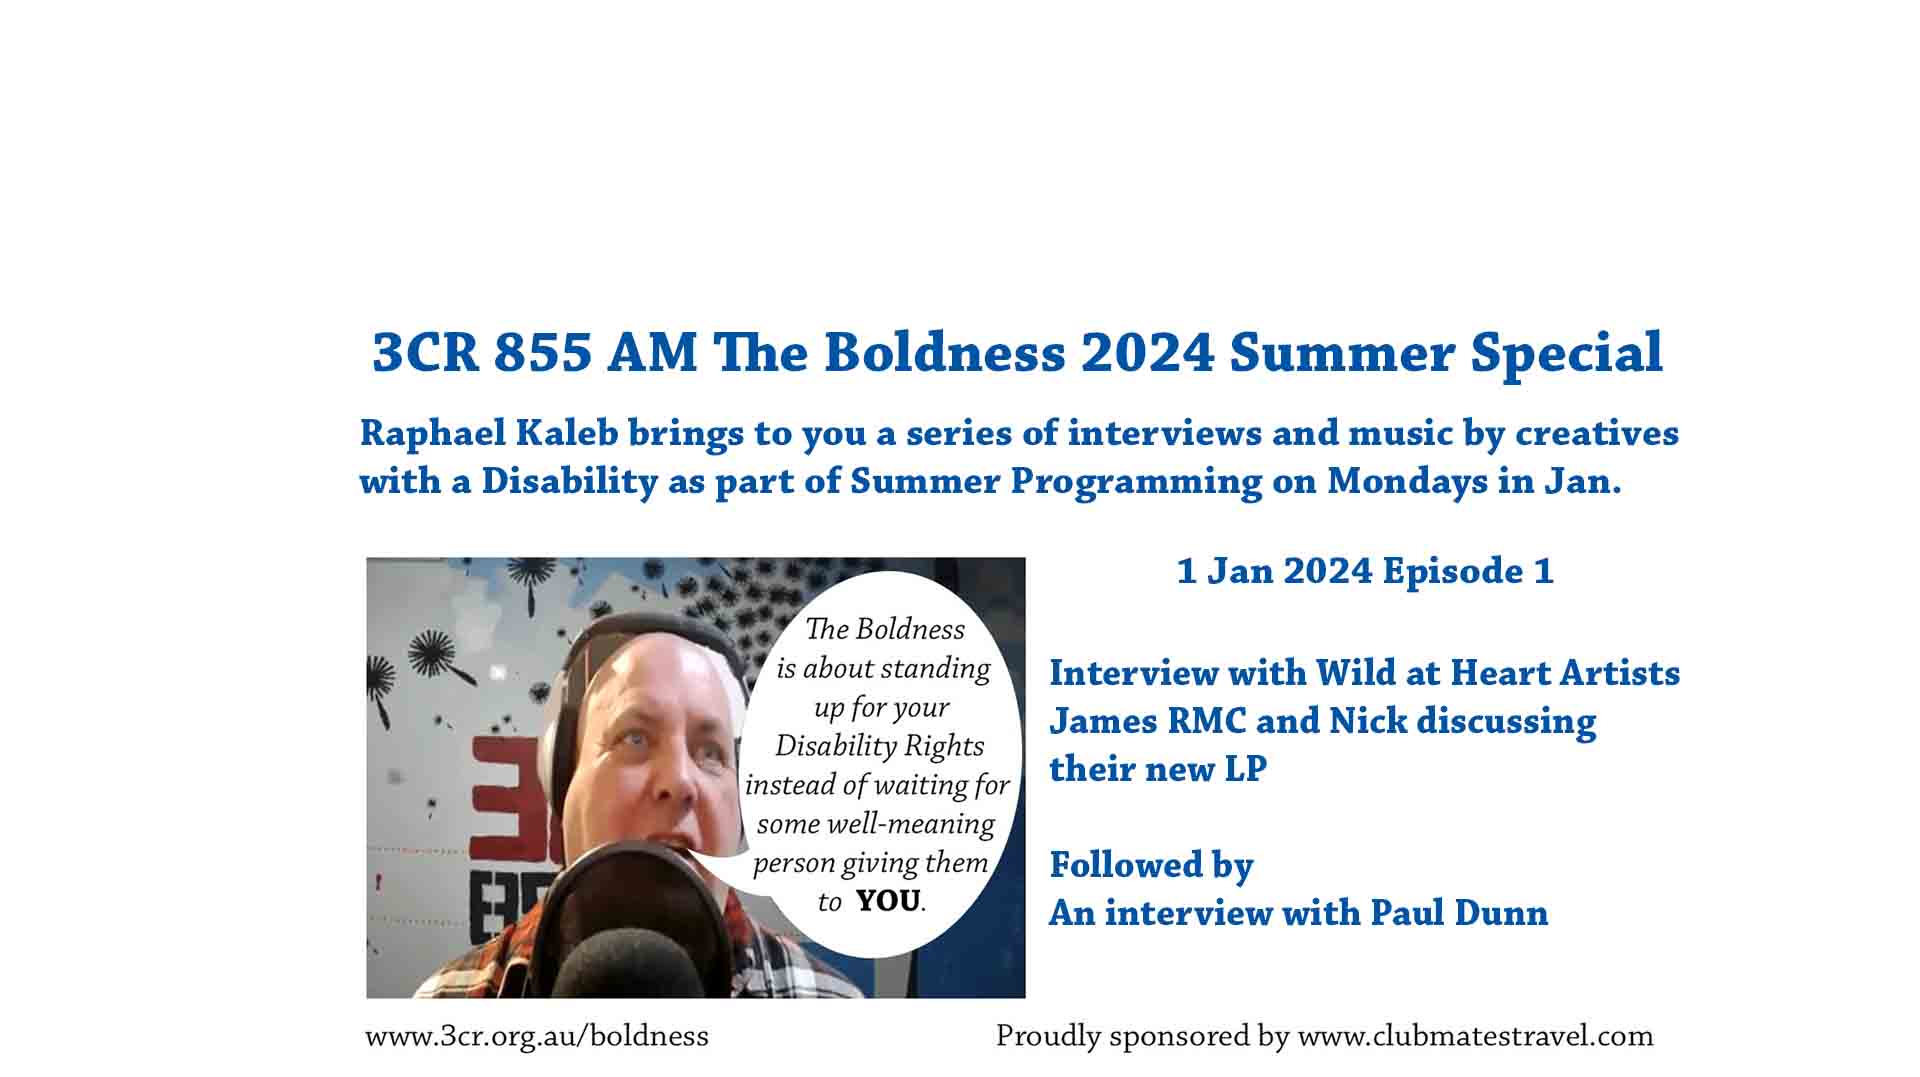 3CR 855 AM  The Boldness Summer Programming Digital Flyer Using Art To Connect with Others 